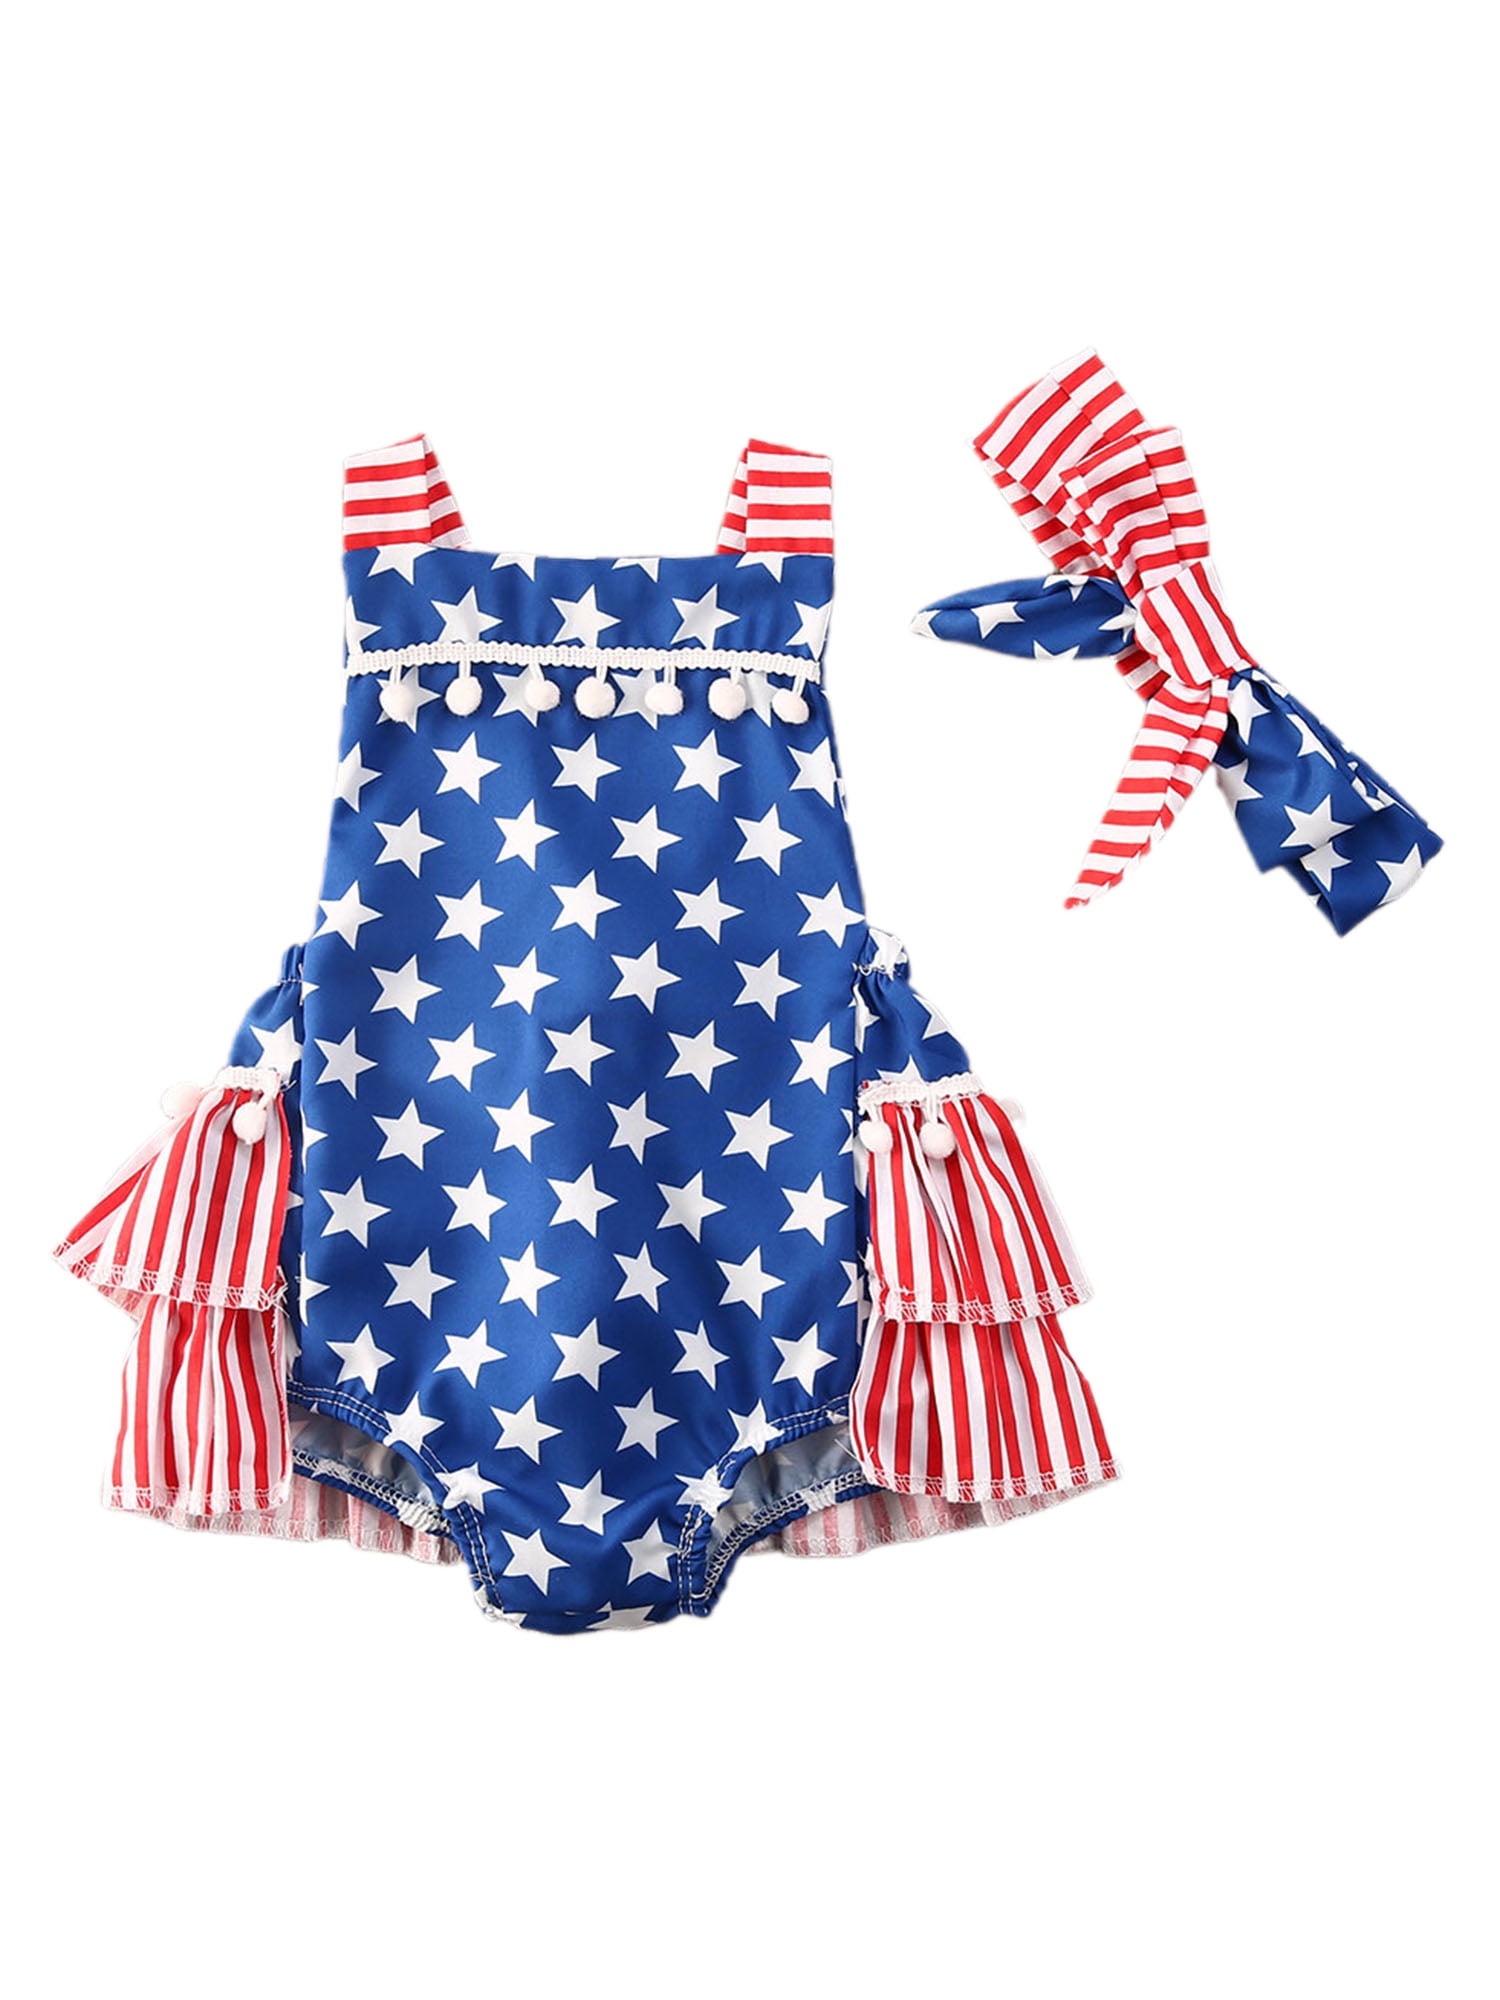 Details about   Toddler Baby Girl 4th of July Romper Bodysuit Headband Outfit Patriotic Clothes 